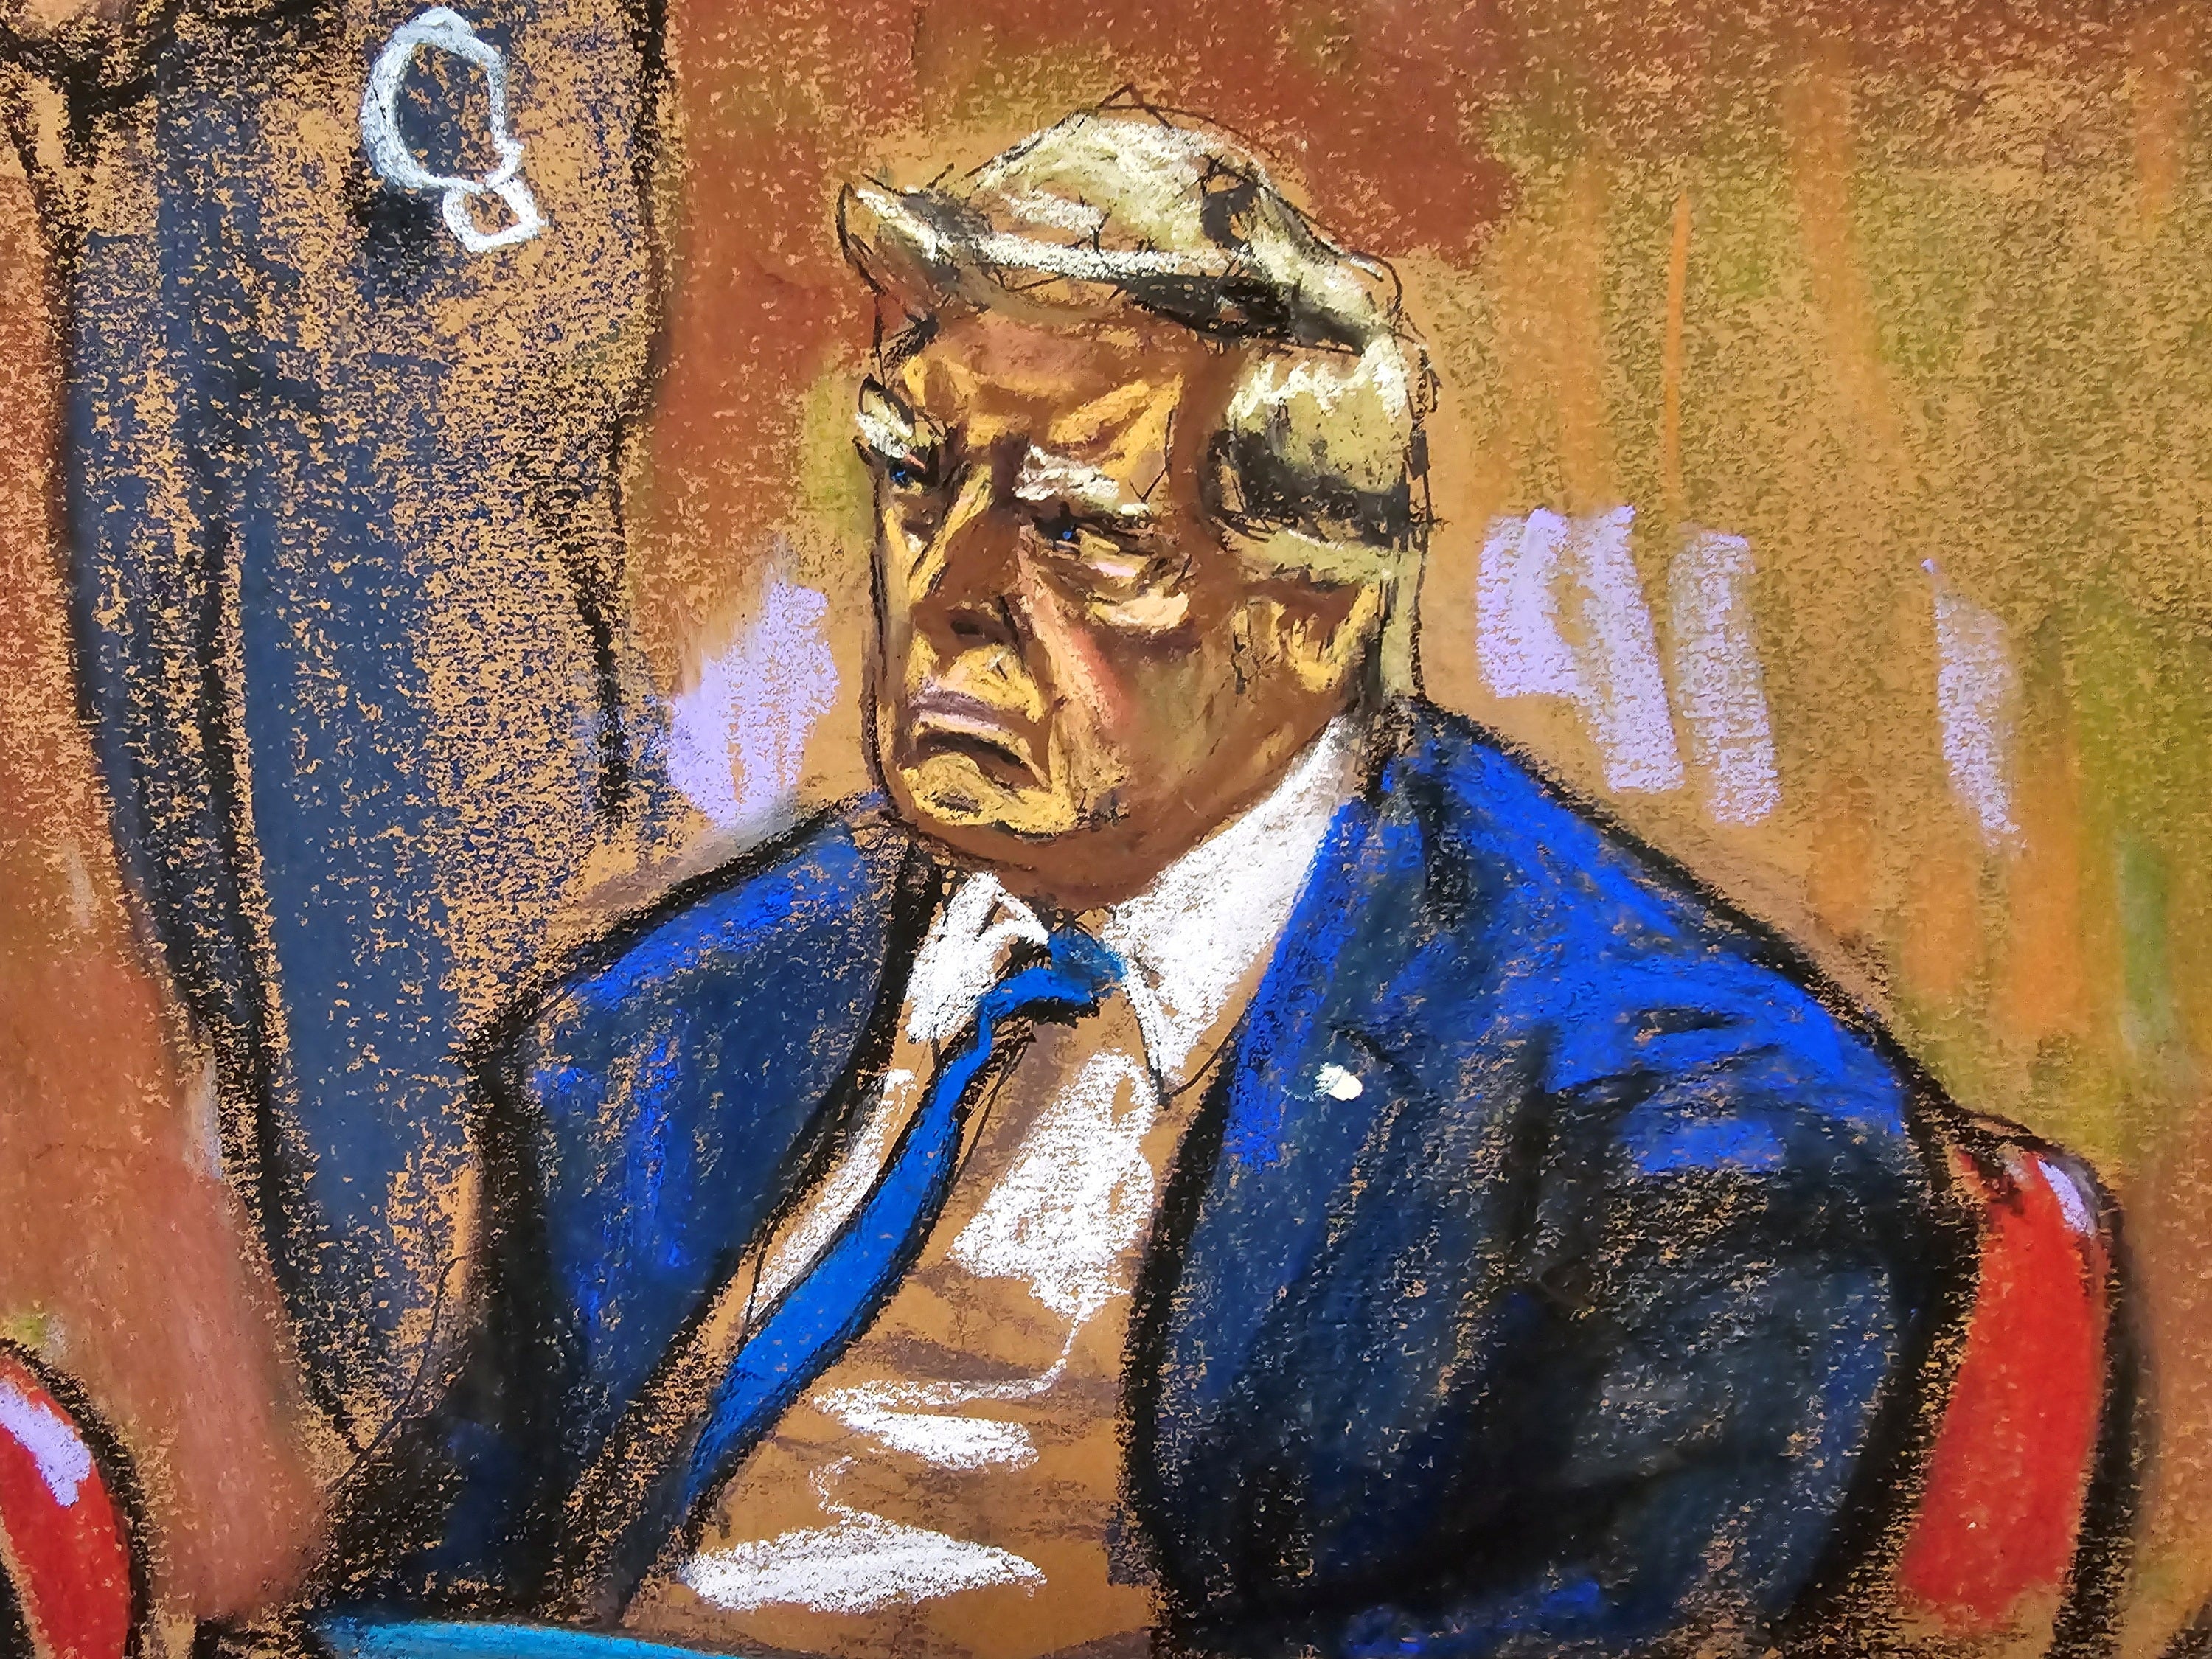 Donald Trump pictured in court sketch during criminal trial